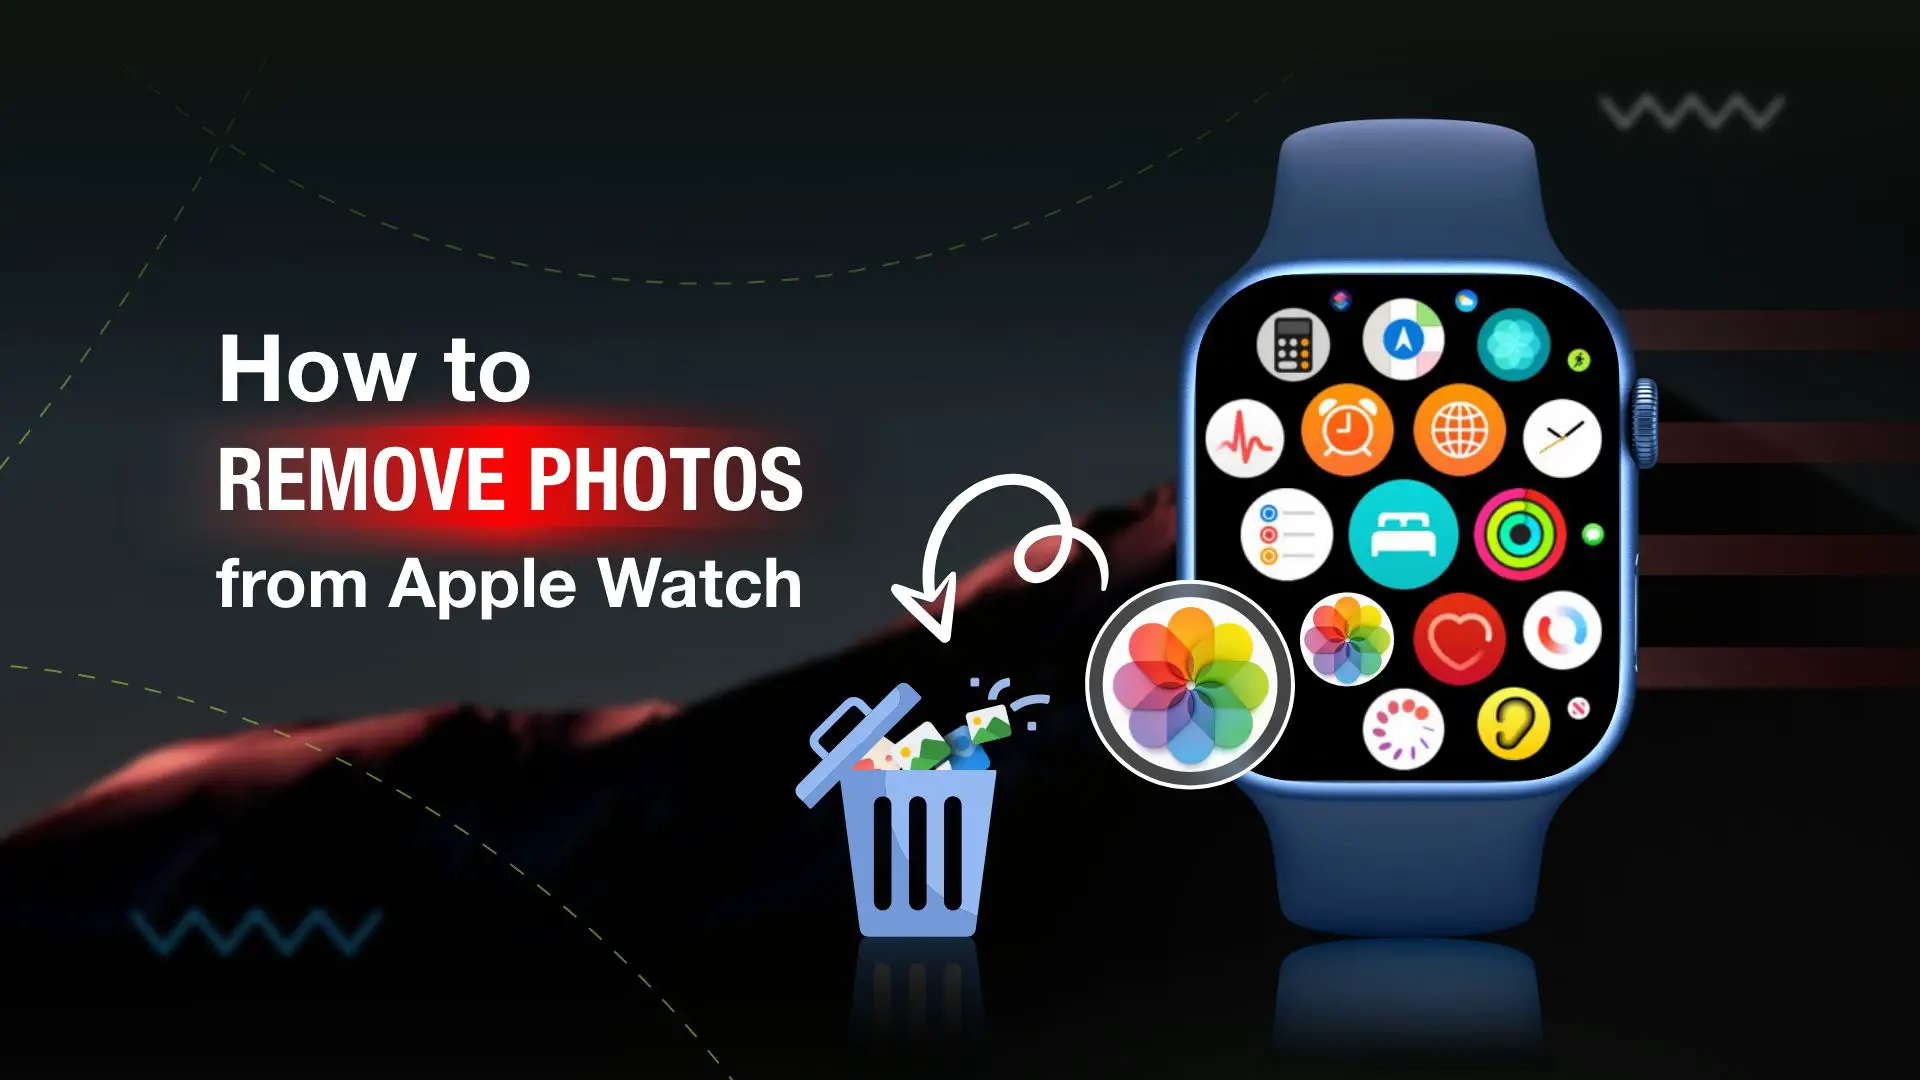 How to Remove Photos from Apple Watch